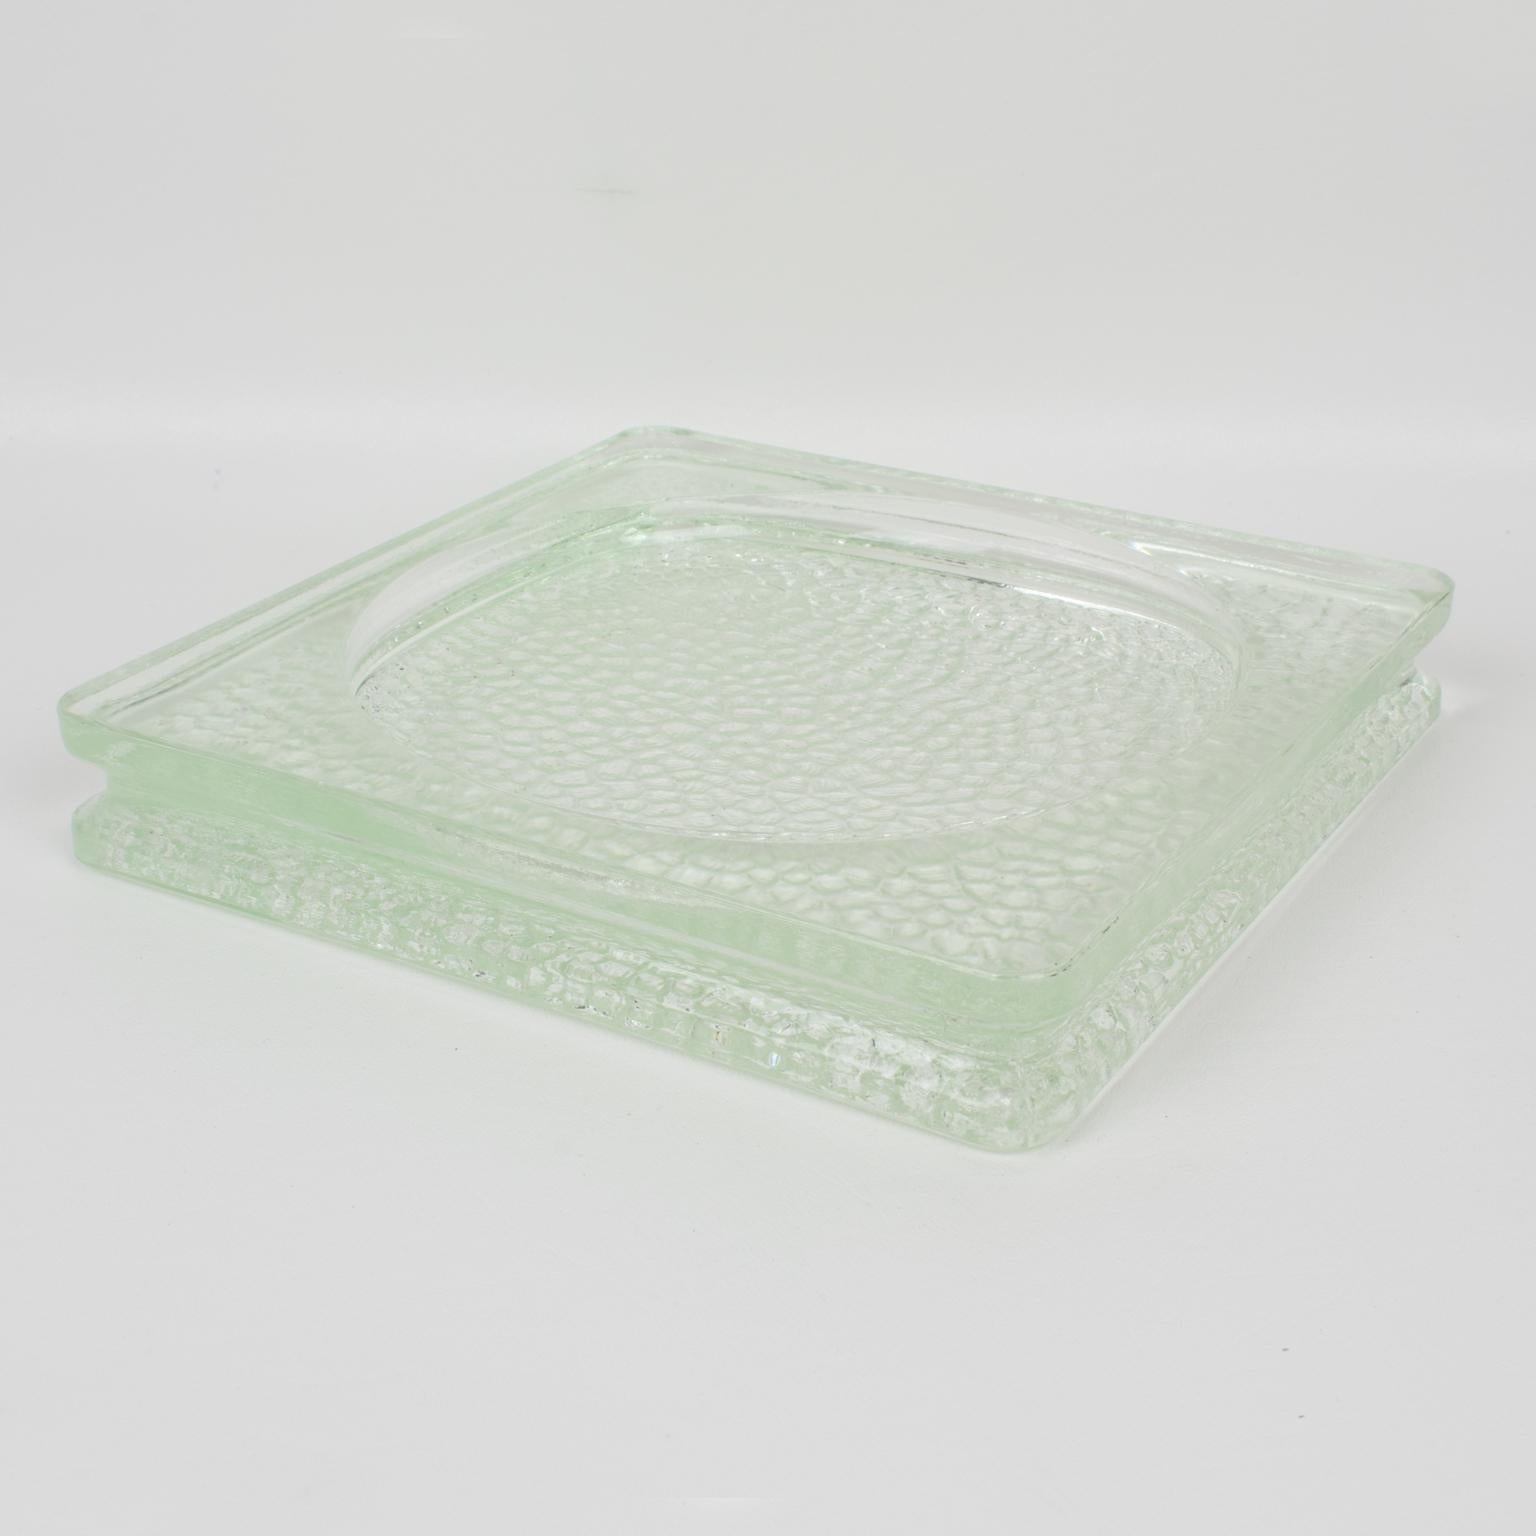 French Lumax Nevada Glass Desk Tidy Catchall Ashtray by Le Corbusier